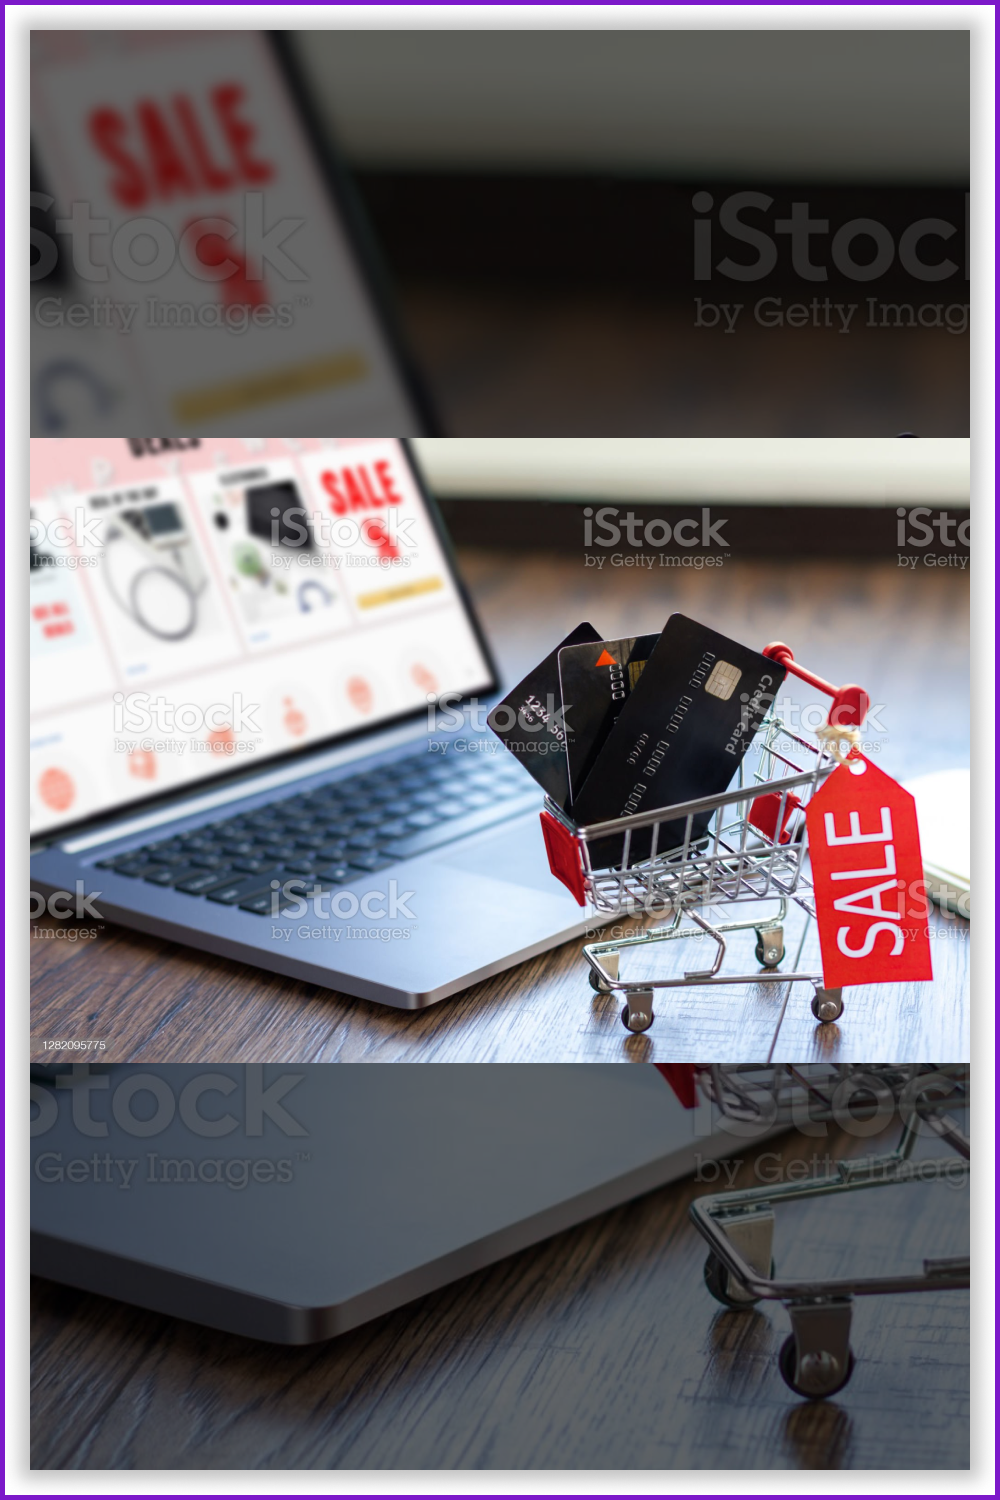 Tiny shopping cart with banking cards and tag “Sale”.